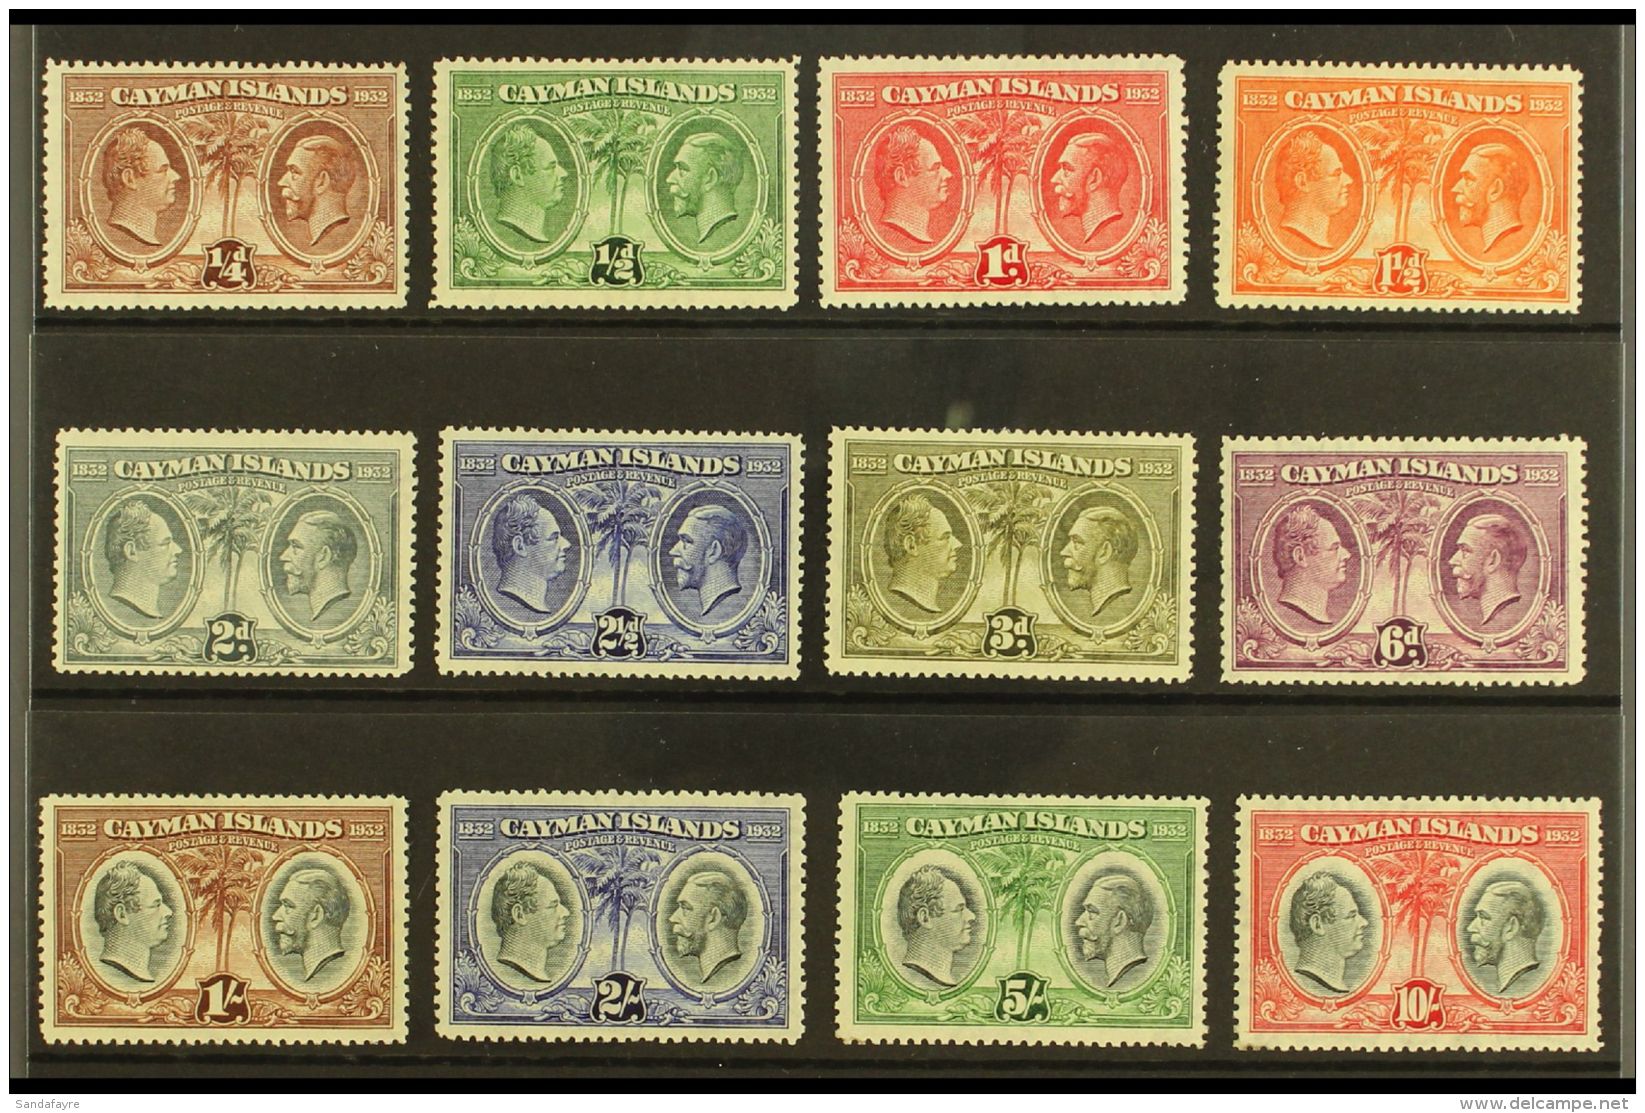 1932 Centenary Complete Set, SG 84/95, Lightly Hinged Mint, Some Gum Toning But Fresh Frontal Appearance, The 10s... - Cayman Islands